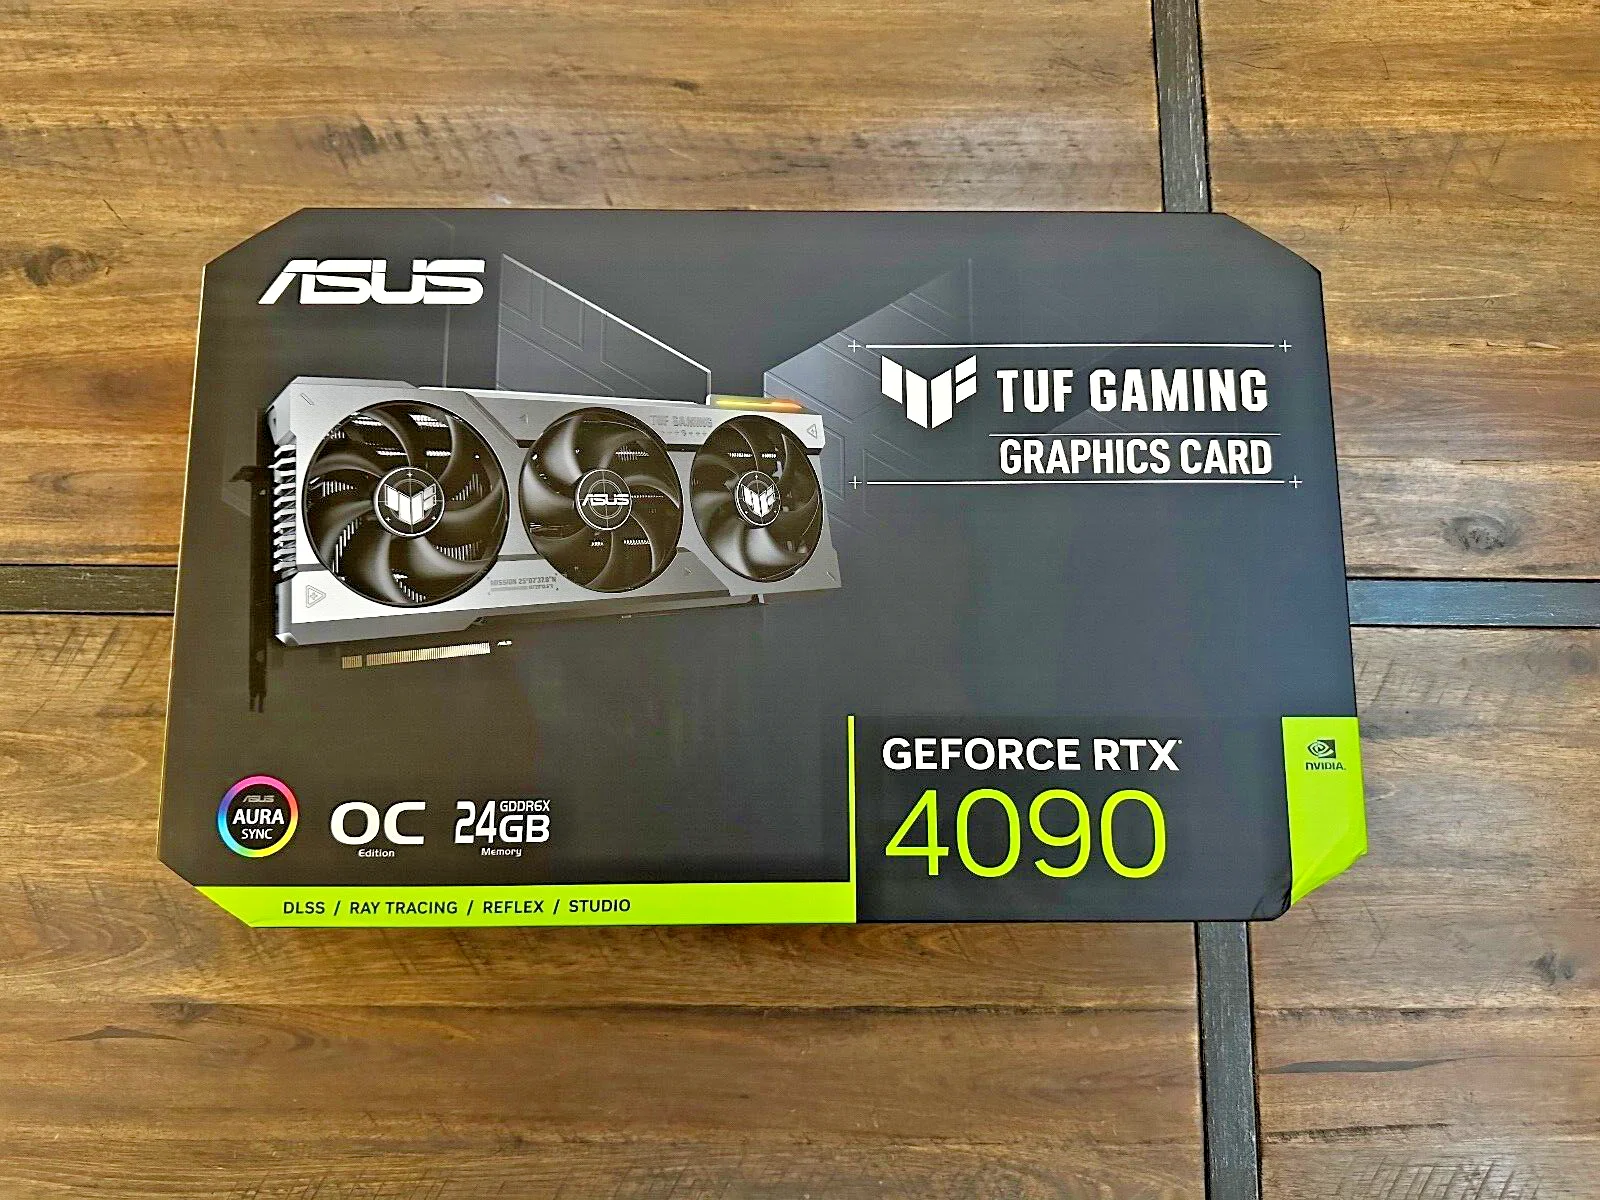 

BUY 3 GET 2 FREE ASUS TUF Gaming GeForce RTX 4090 OC 24GB GDDR6X Graphics Card - SEALED BRAND NEW